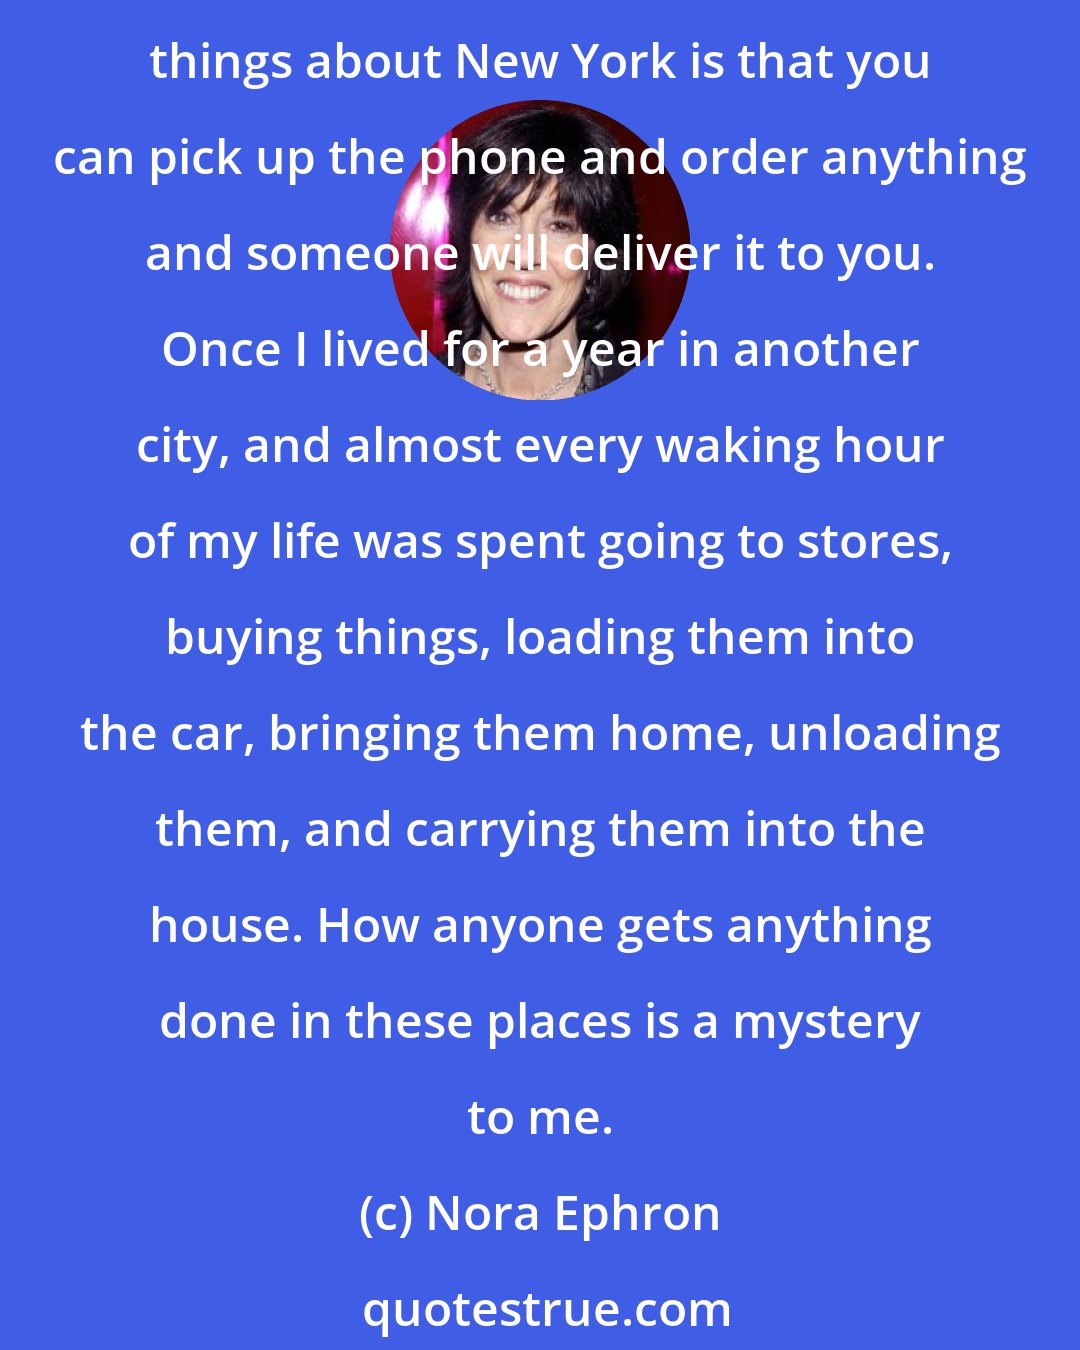 Nora Ephron: I live in New York City. I could never live anywhere else. The events of September 11 forced me to confront the fact that no matter what, I live here and always will. One of my favorite things about New York is that you can pick up the phone and order anything and someone will deliver it to you. Once I lived for a year in another city, and almost every waking hour of my life was spent going to stores, buying things, loading them into the car, bringing them home, unloading them, and carrying them into the house. How anyone gets anything done in these places is a mystery to me.